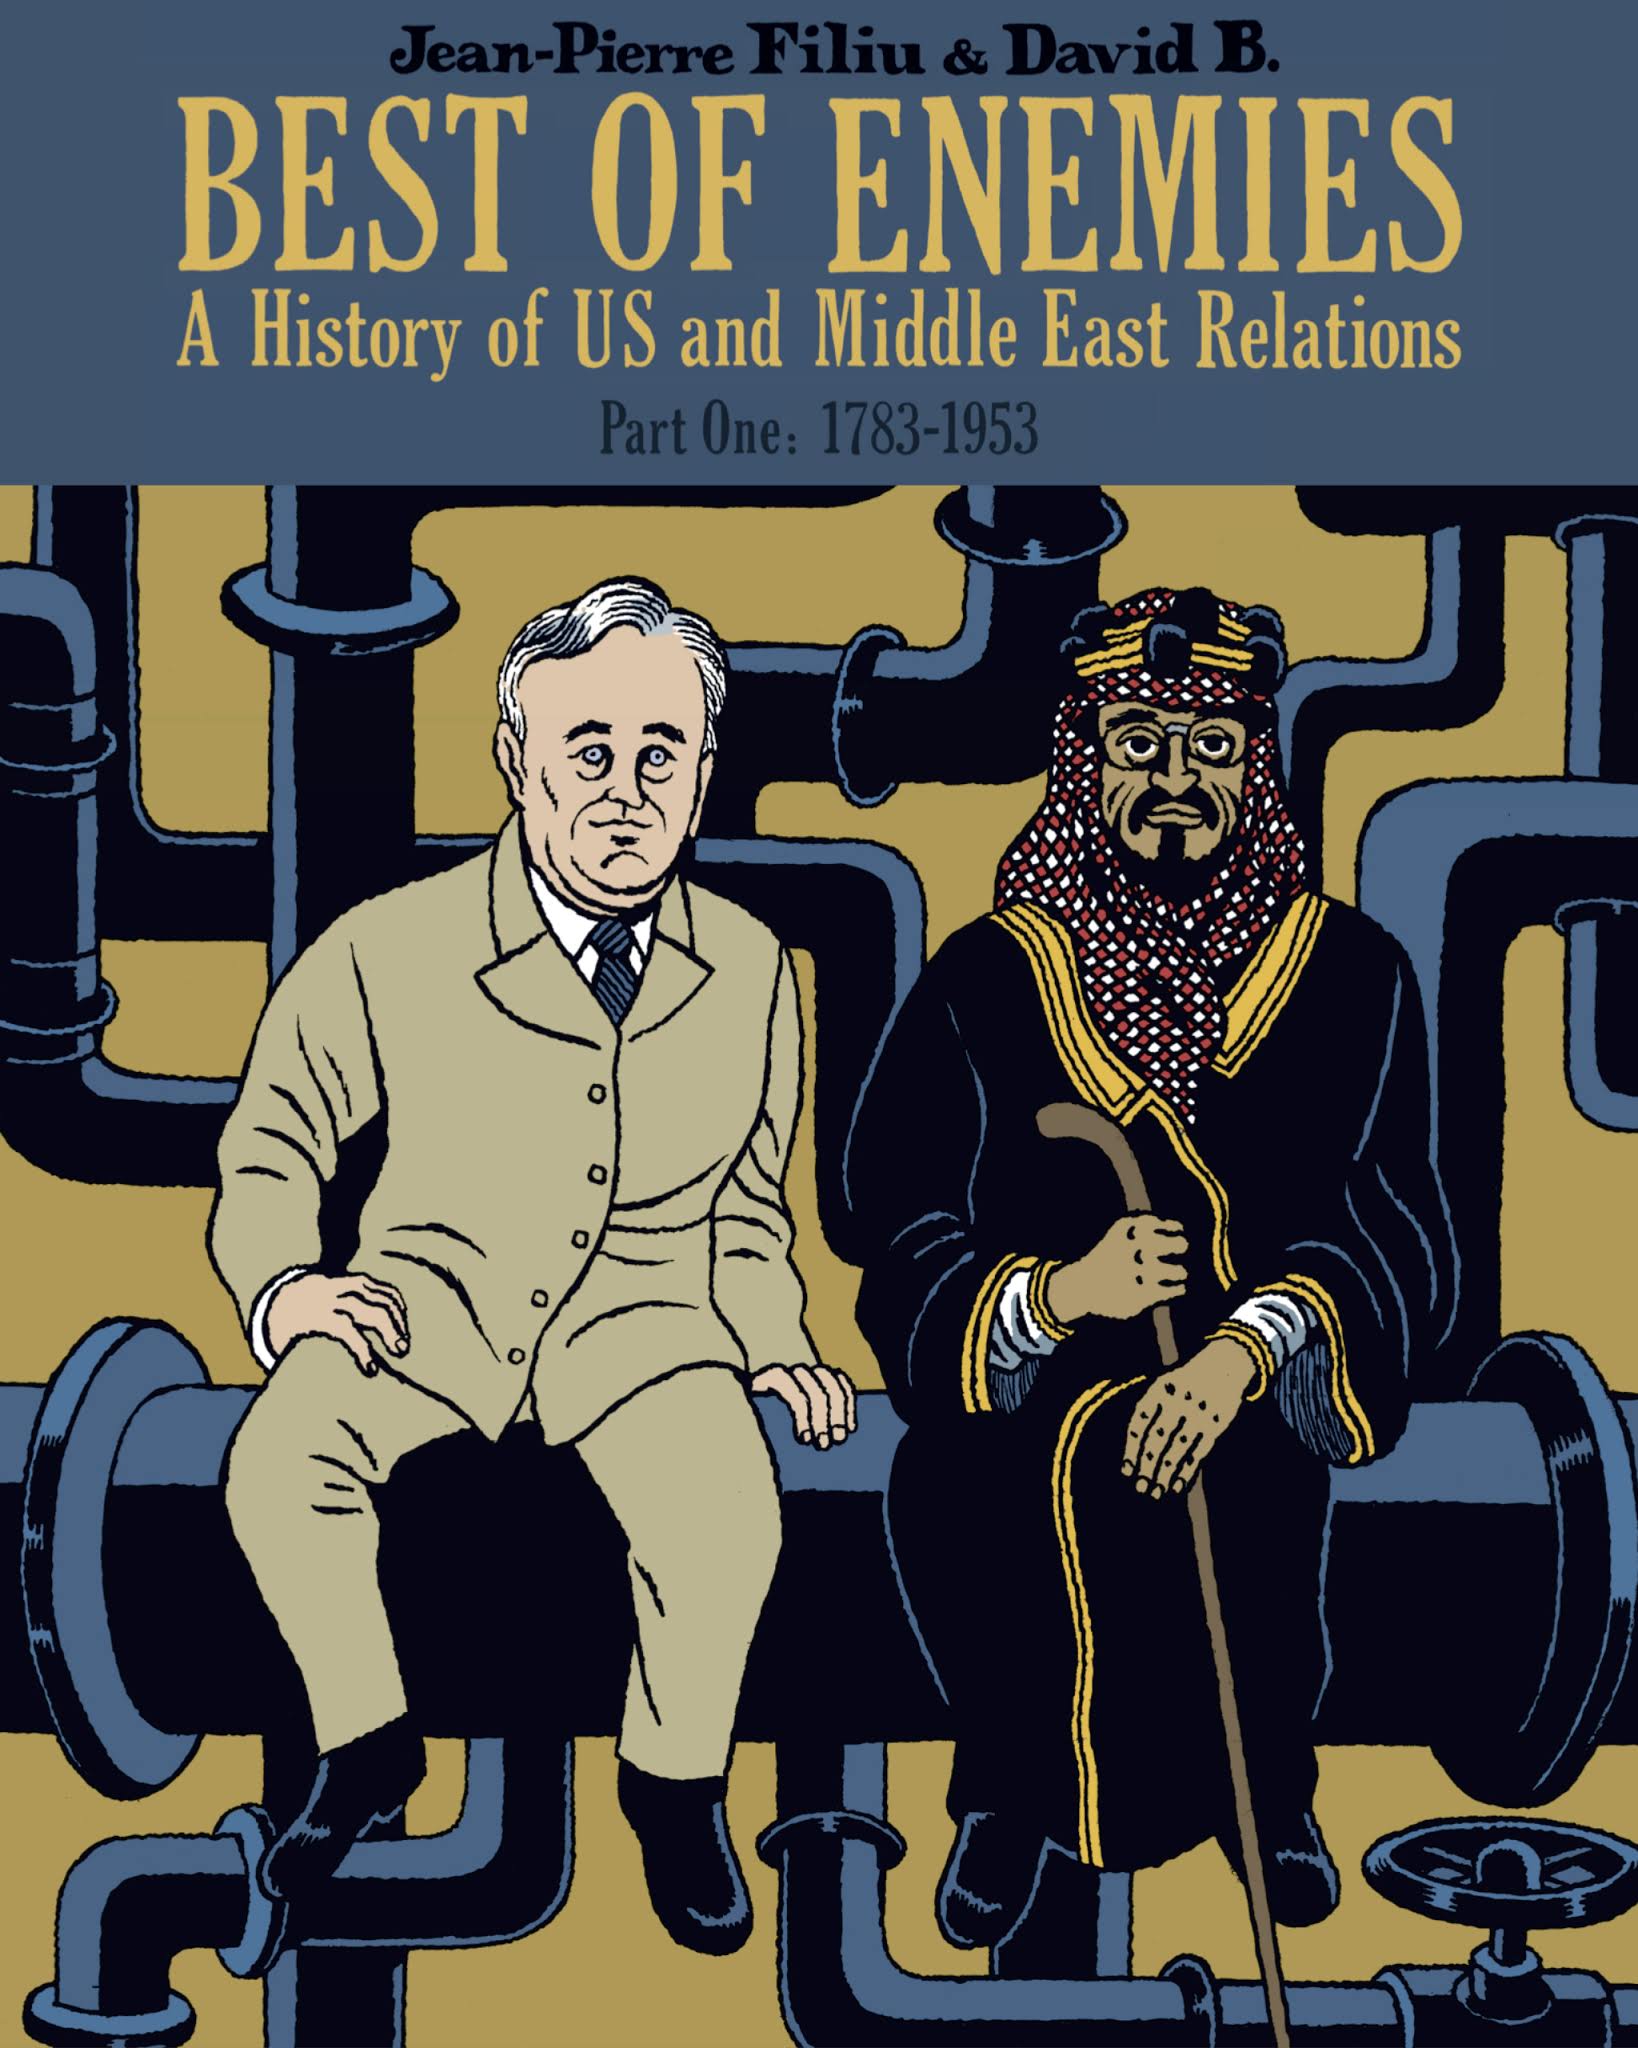 Read online Best of Enemies: A History of US and Middle East Relations comic -  Issue # TPB 1 - 1